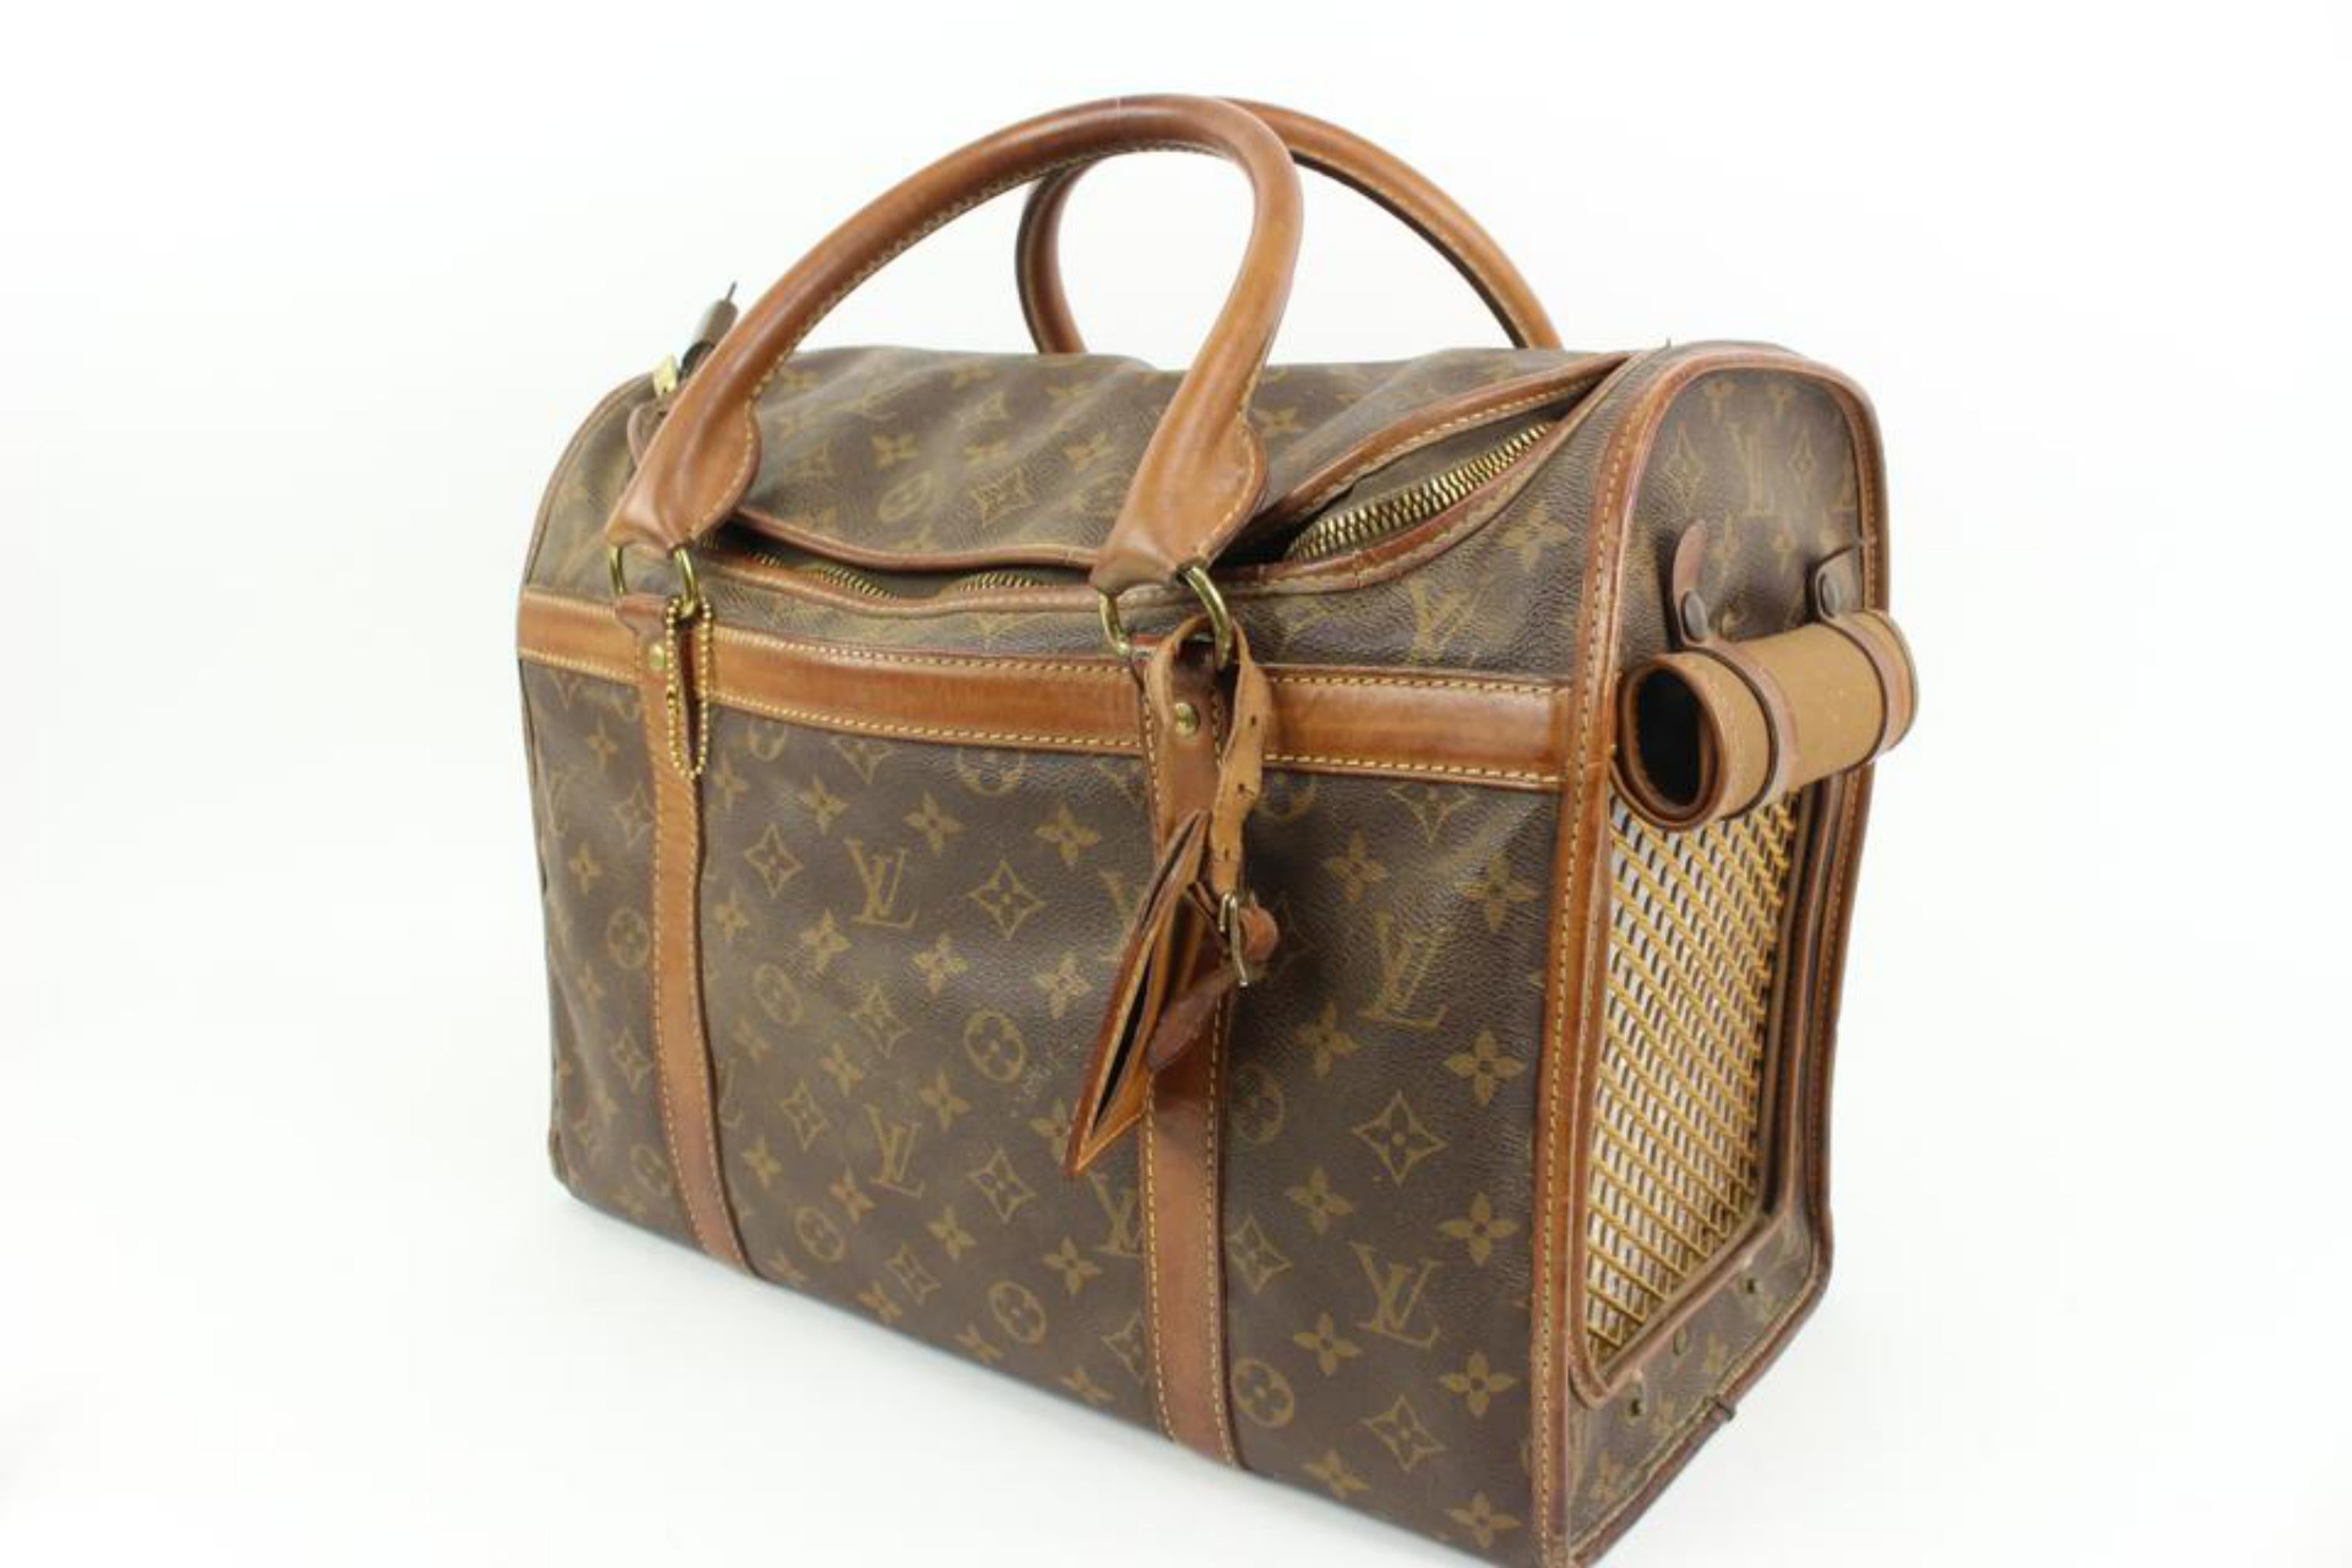 Louis Vuitton Monogram Sac Chien 40 Pet Carrier Dog Cage 19lk323s
Date Code/Serial Number: SL0938
Made In: France
Measurements: Length:  15.5